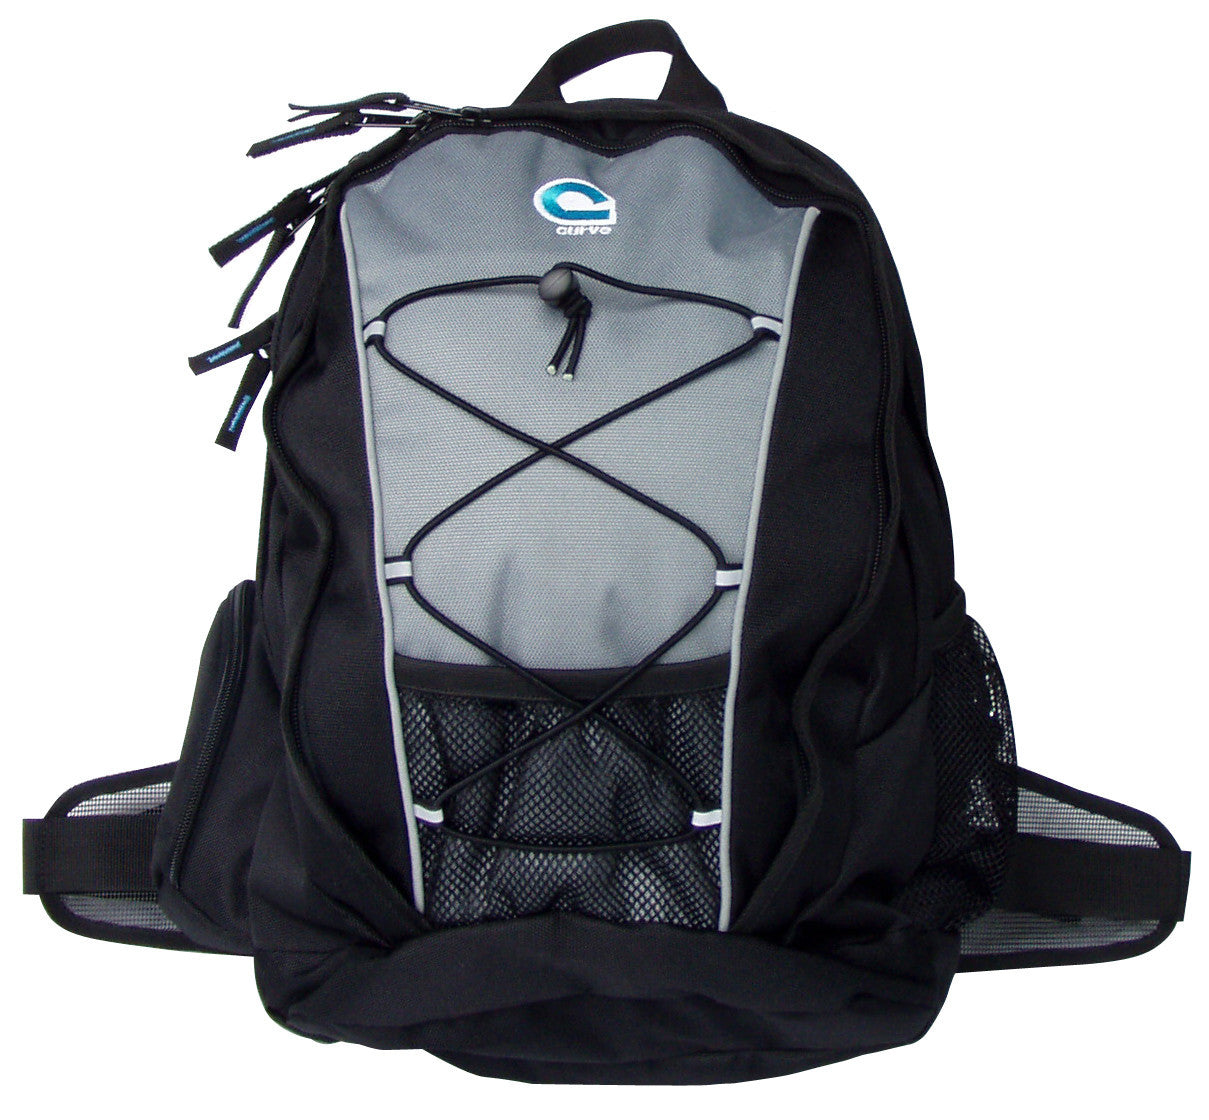 Washington man designs surf system backpack for mobility in fishing  destinations 